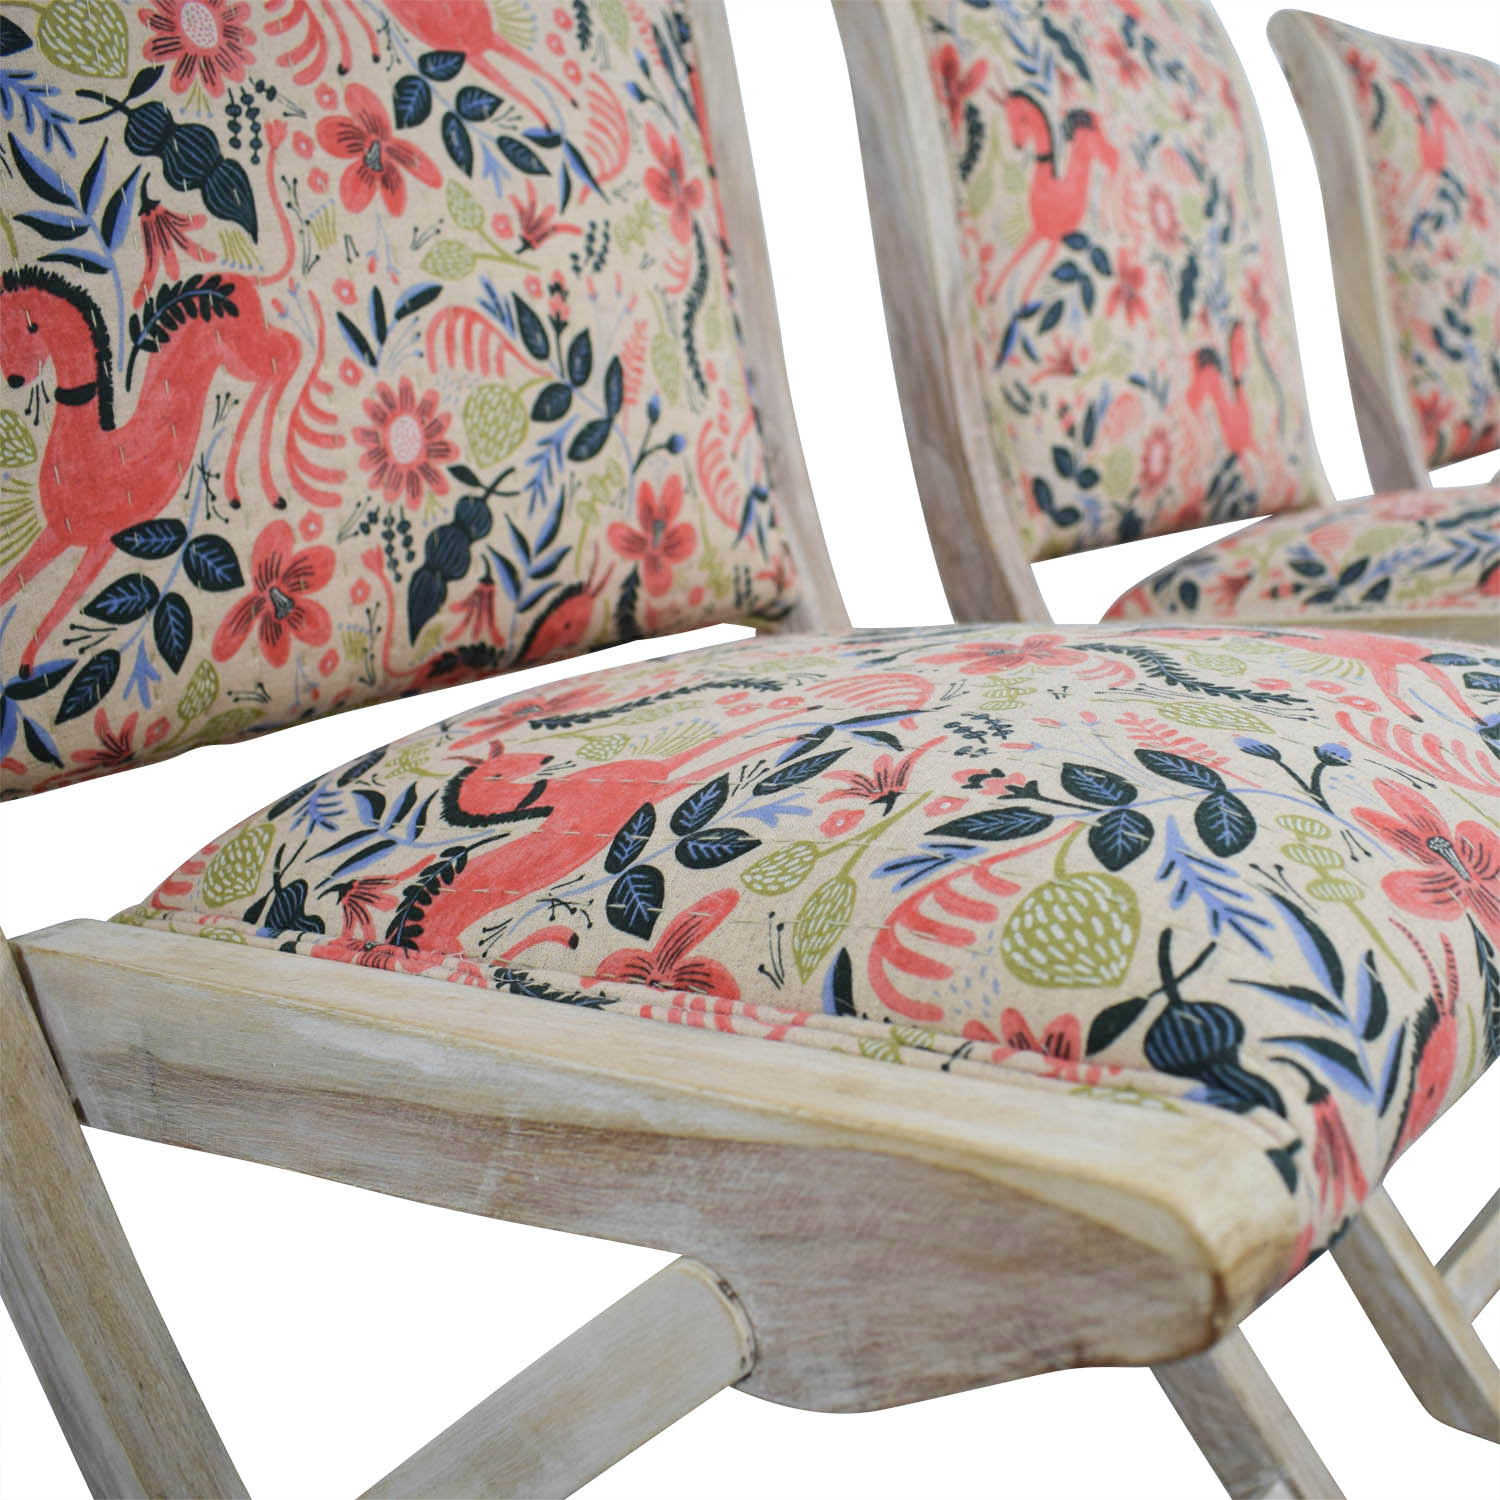 https://res.cloudinary.com/dkqtxtobb/image/upload/f_auto,q_auto:best,w_1500/product-assets/45002/anthropologie/chairs/dining-chairs/buy-anthropologie-rustic-multi-colored-unicorn-folding-chairs.jpeg